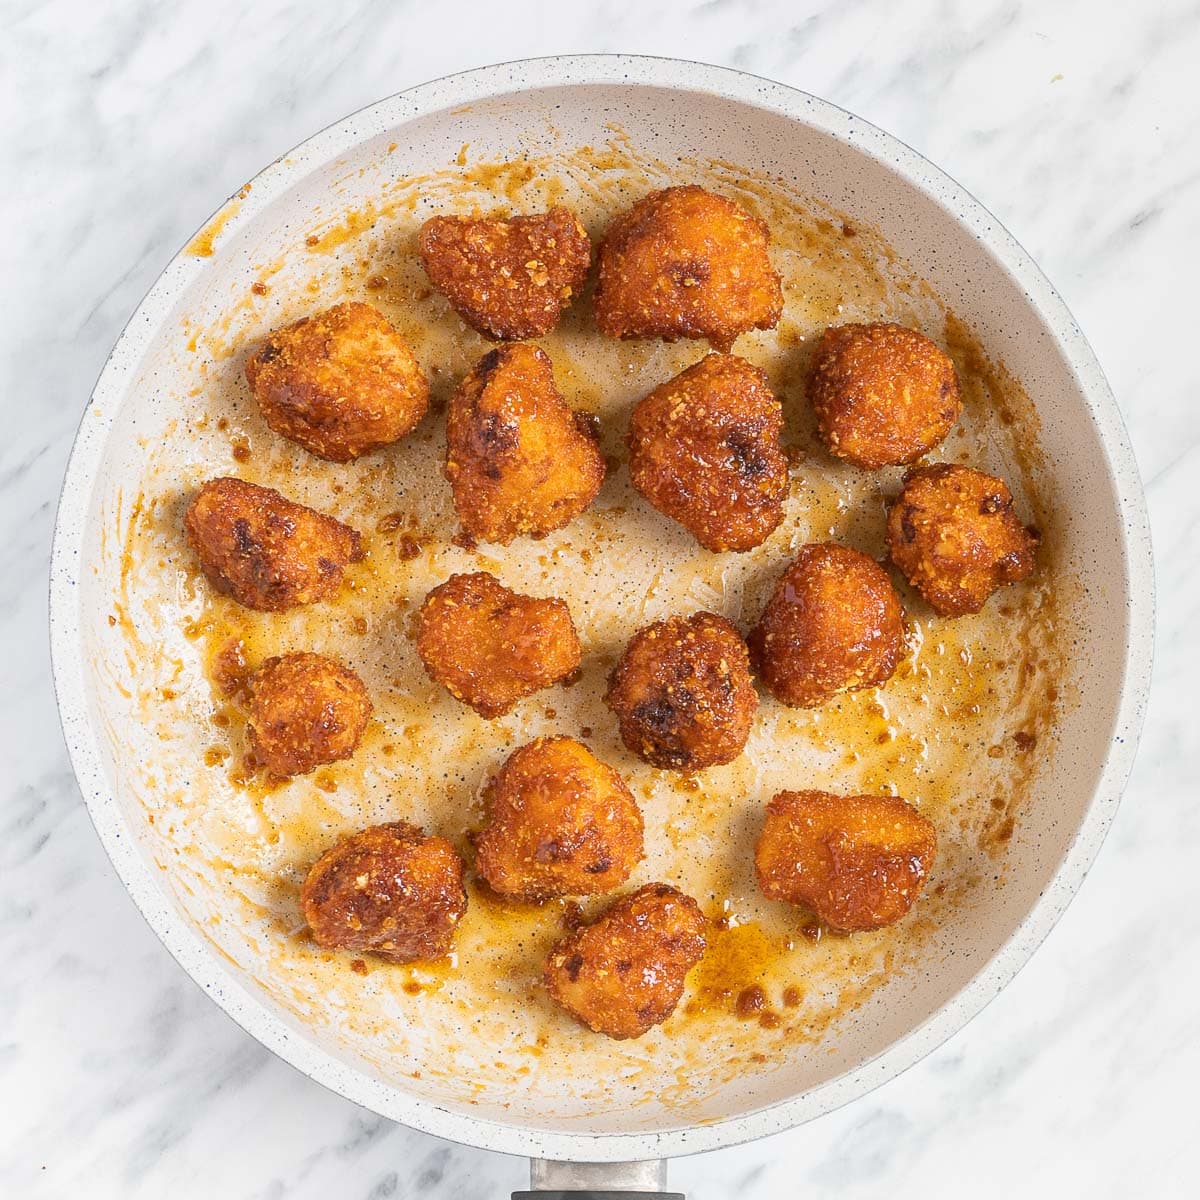 Breaded cauliflower florets are thinly covered in a light orange sauce in a white frying pan